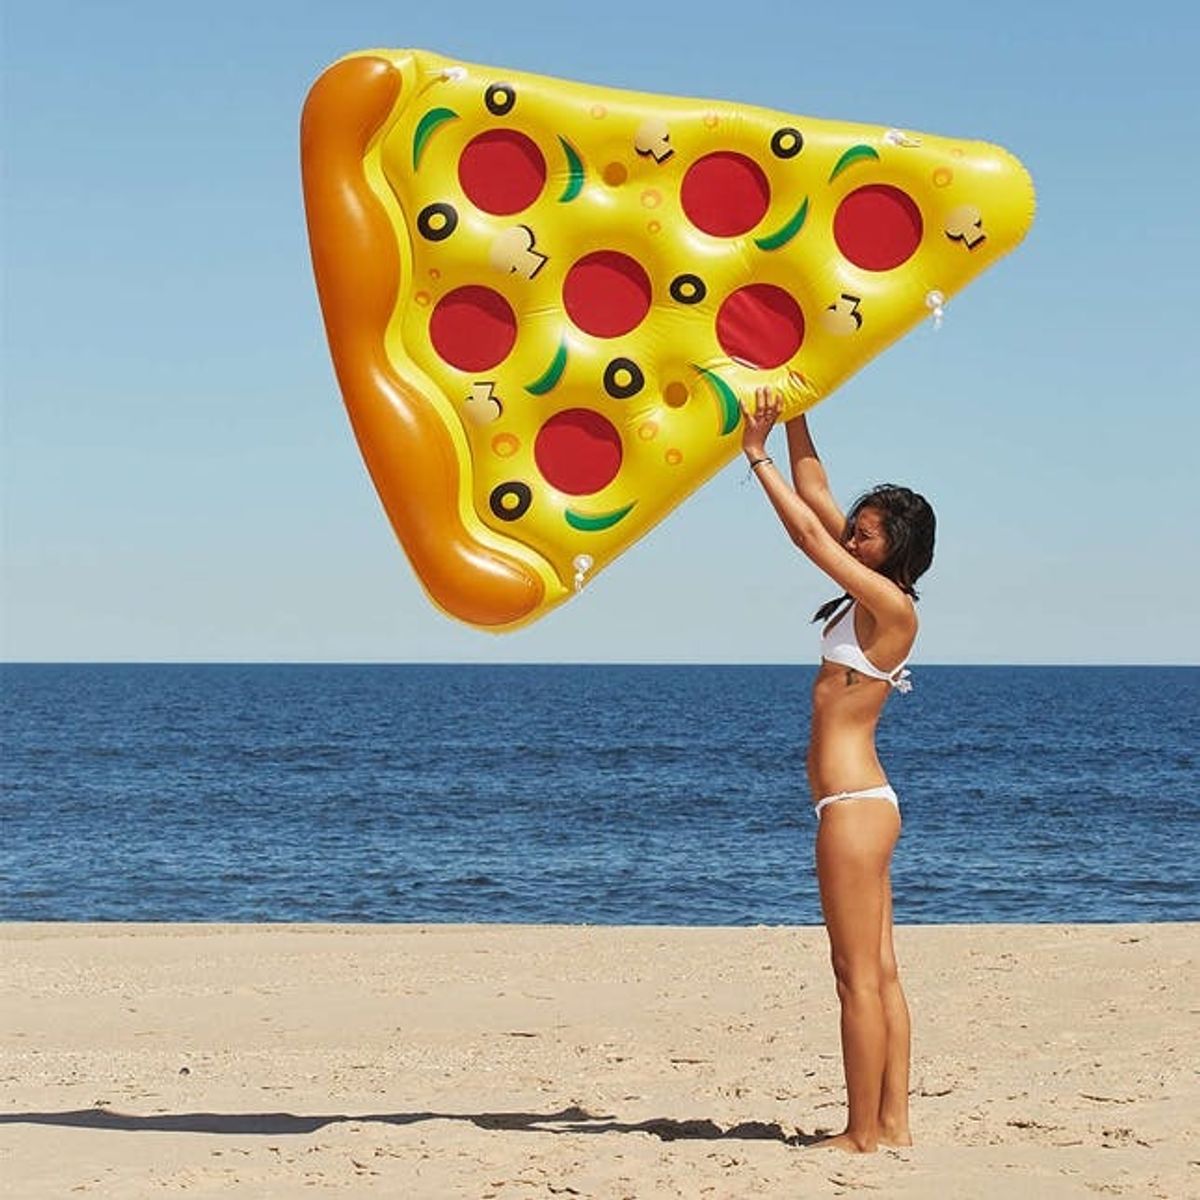 The BritList: Pizza Floats, Pizza Bikinis and More